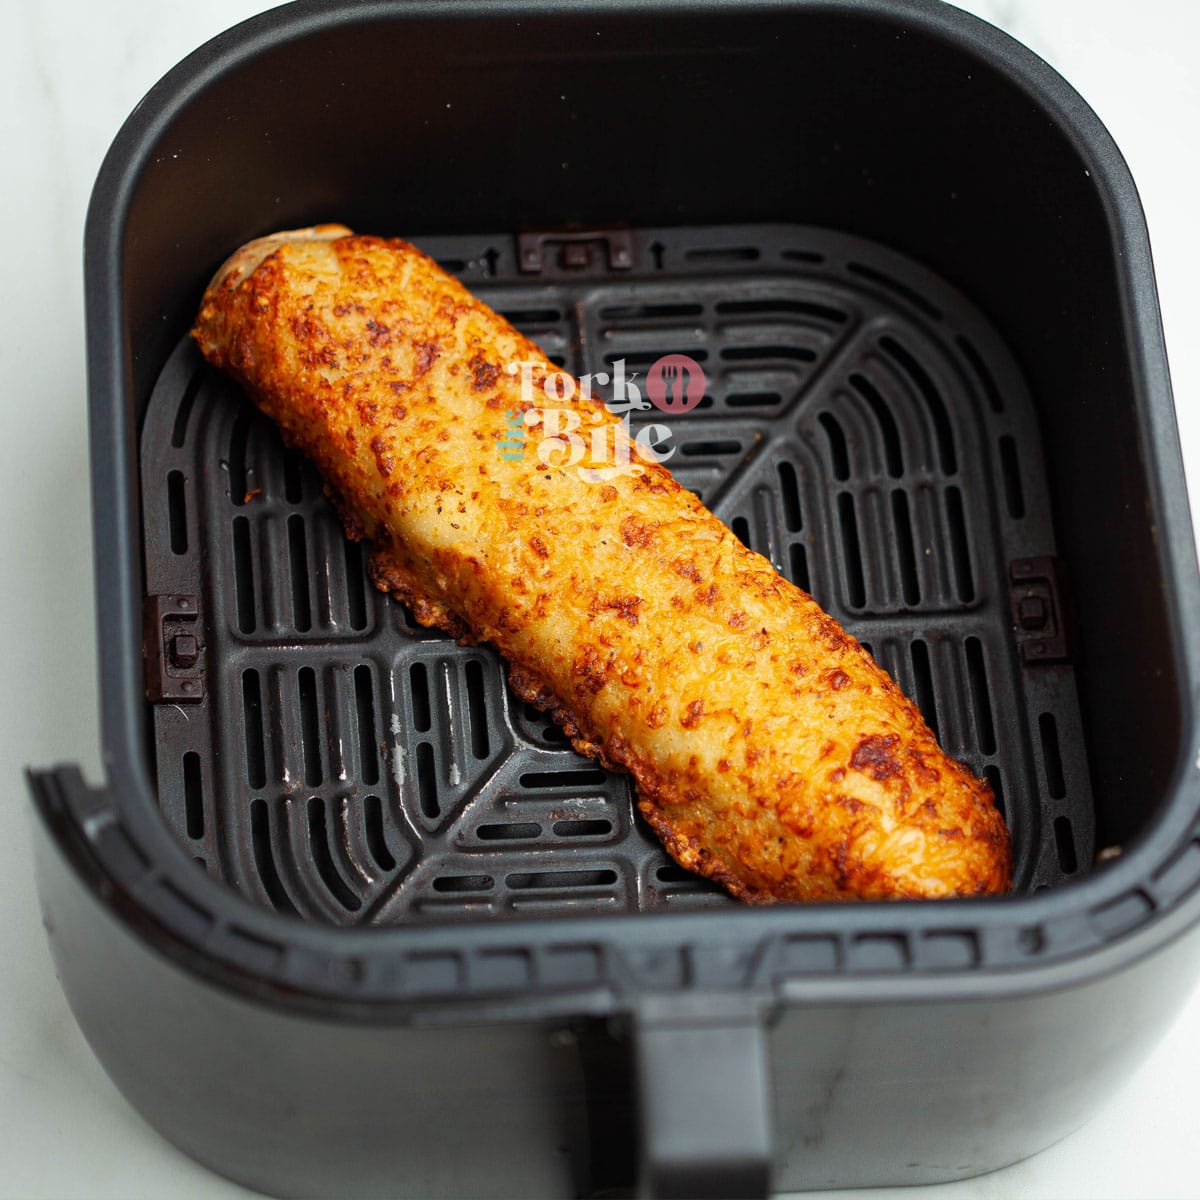 Want to enjoy a perfectly reheated Costco chicken bake? Discover our foolproof air fryer method to bring your leftovers back to life, ensuring crispy, delicious results every time!